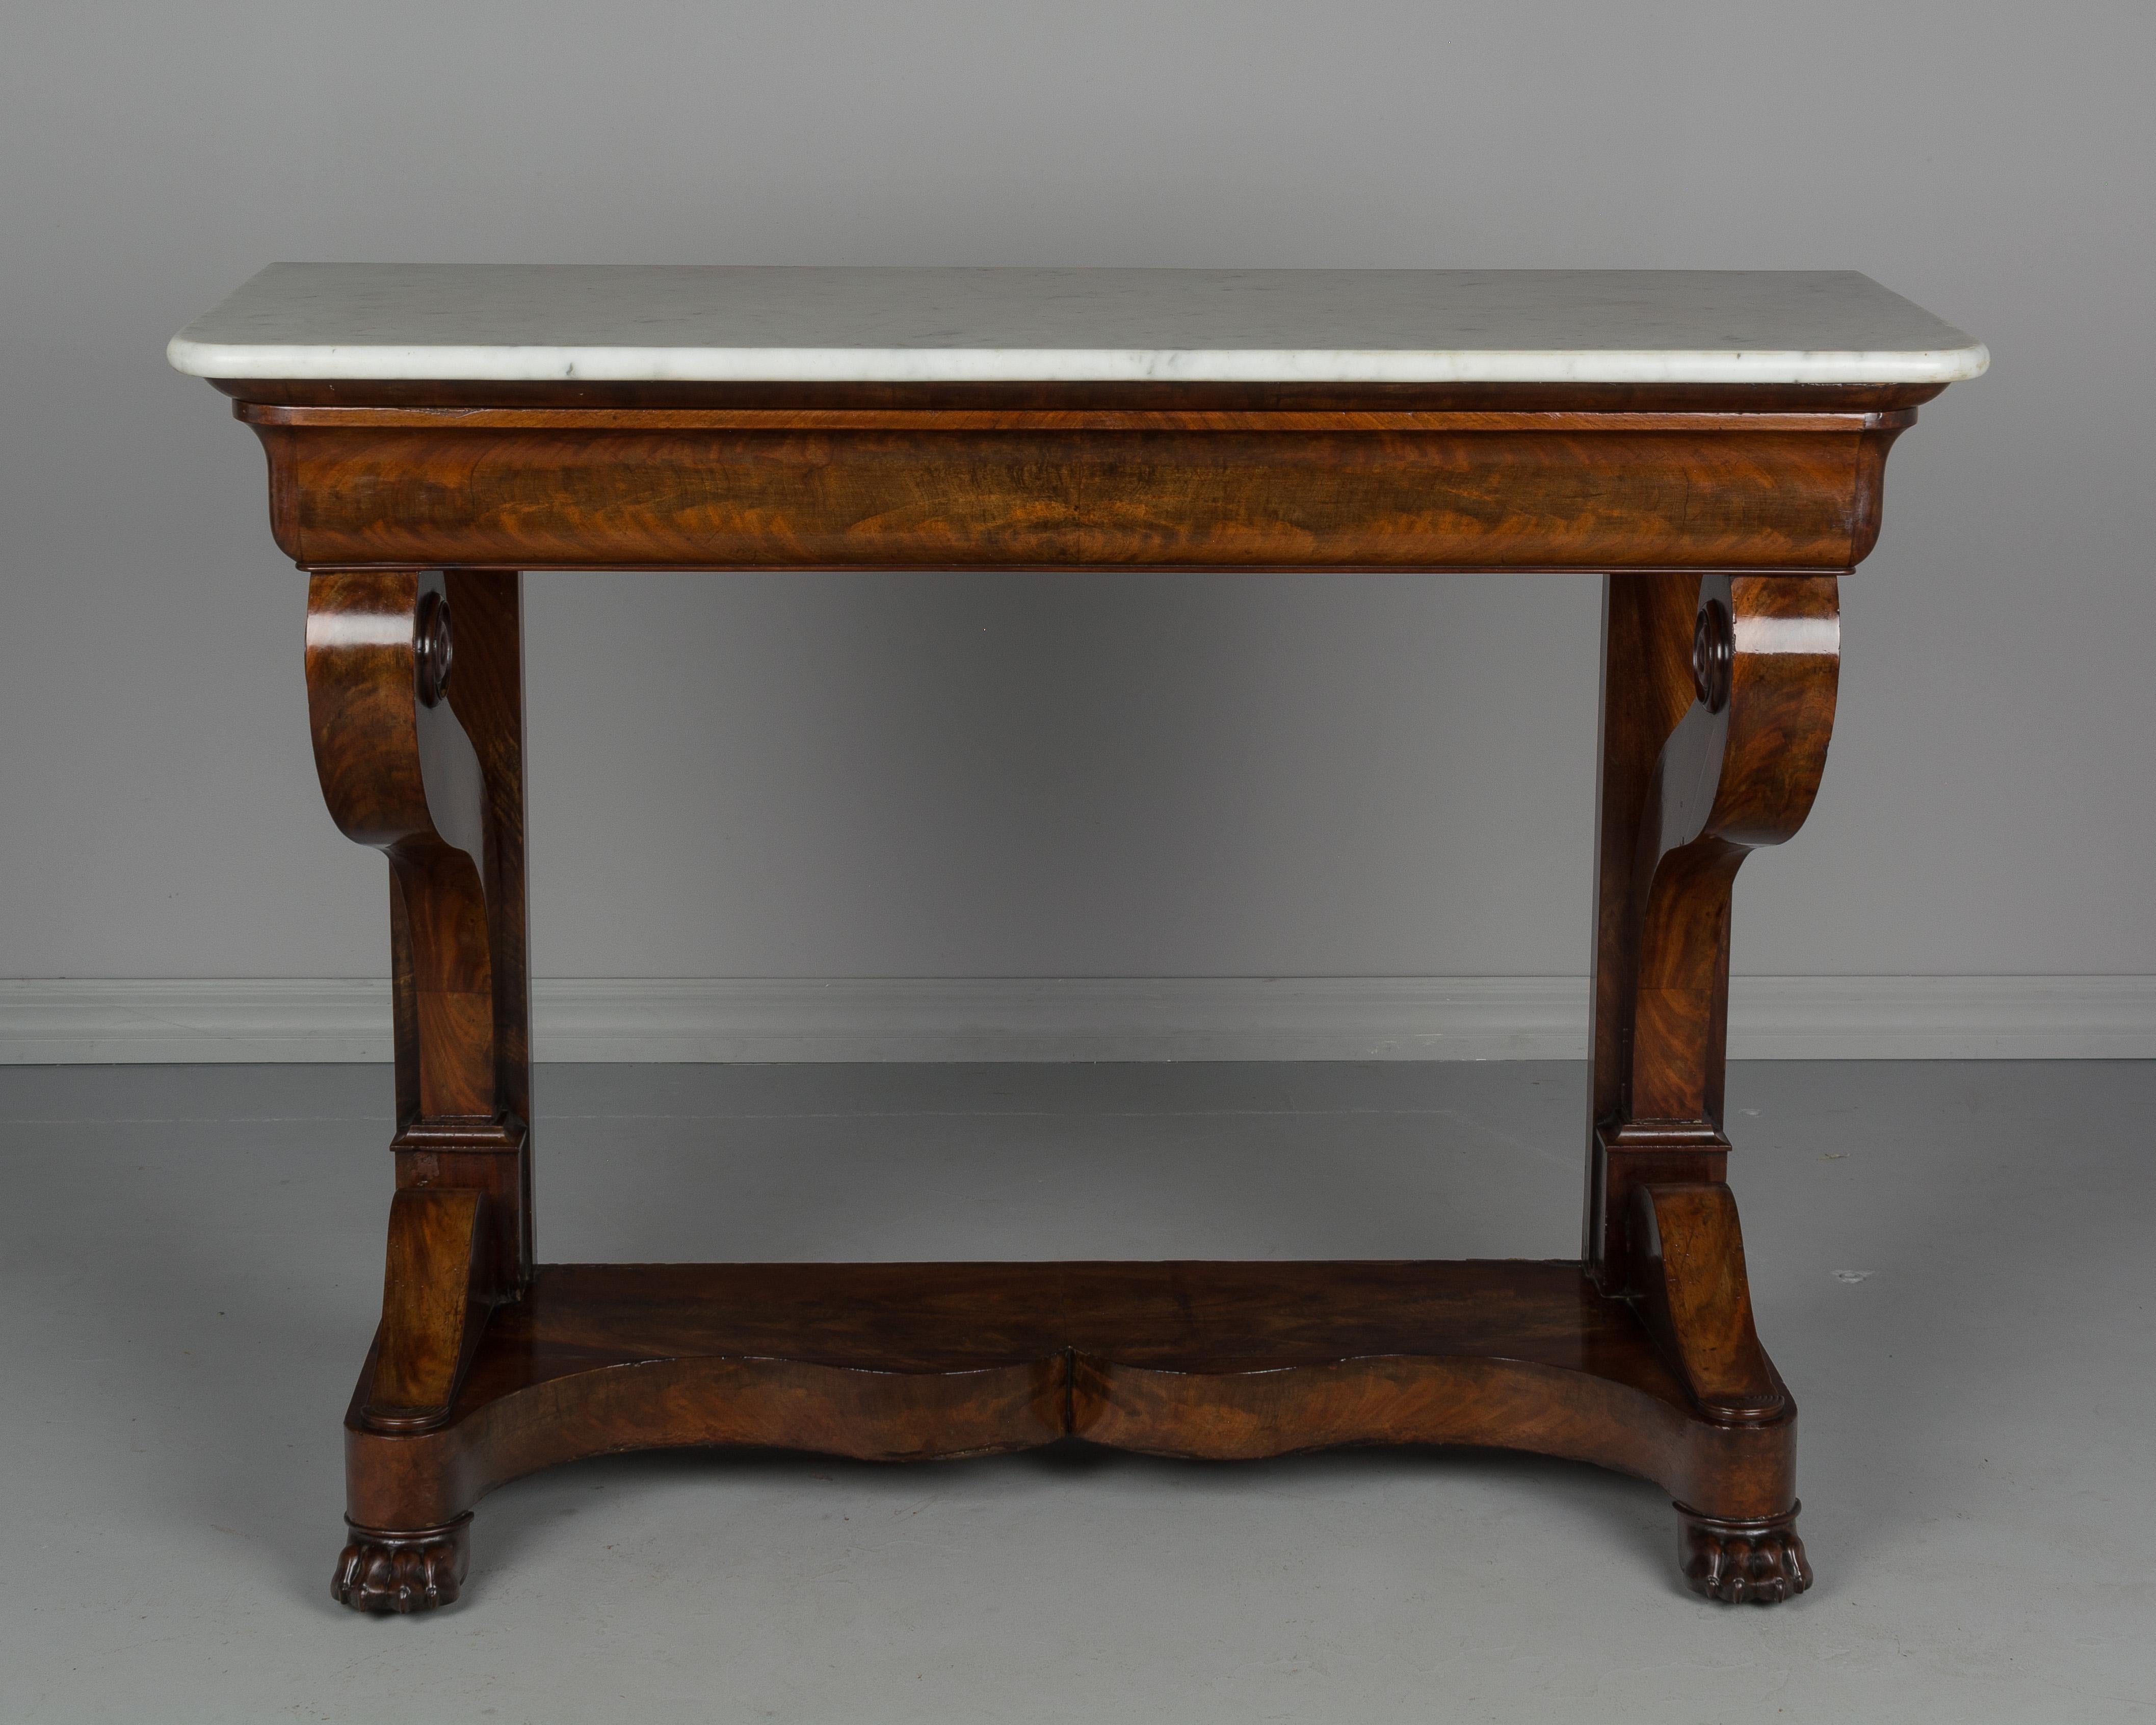 An early 19th century French Louis-Philippe period console made of bookmatched veneer of flame mahogany with oak as a secondary wood. Sculptural front legs ending in scrolls and resting on a plinth base with curved front and lion's paw feet.